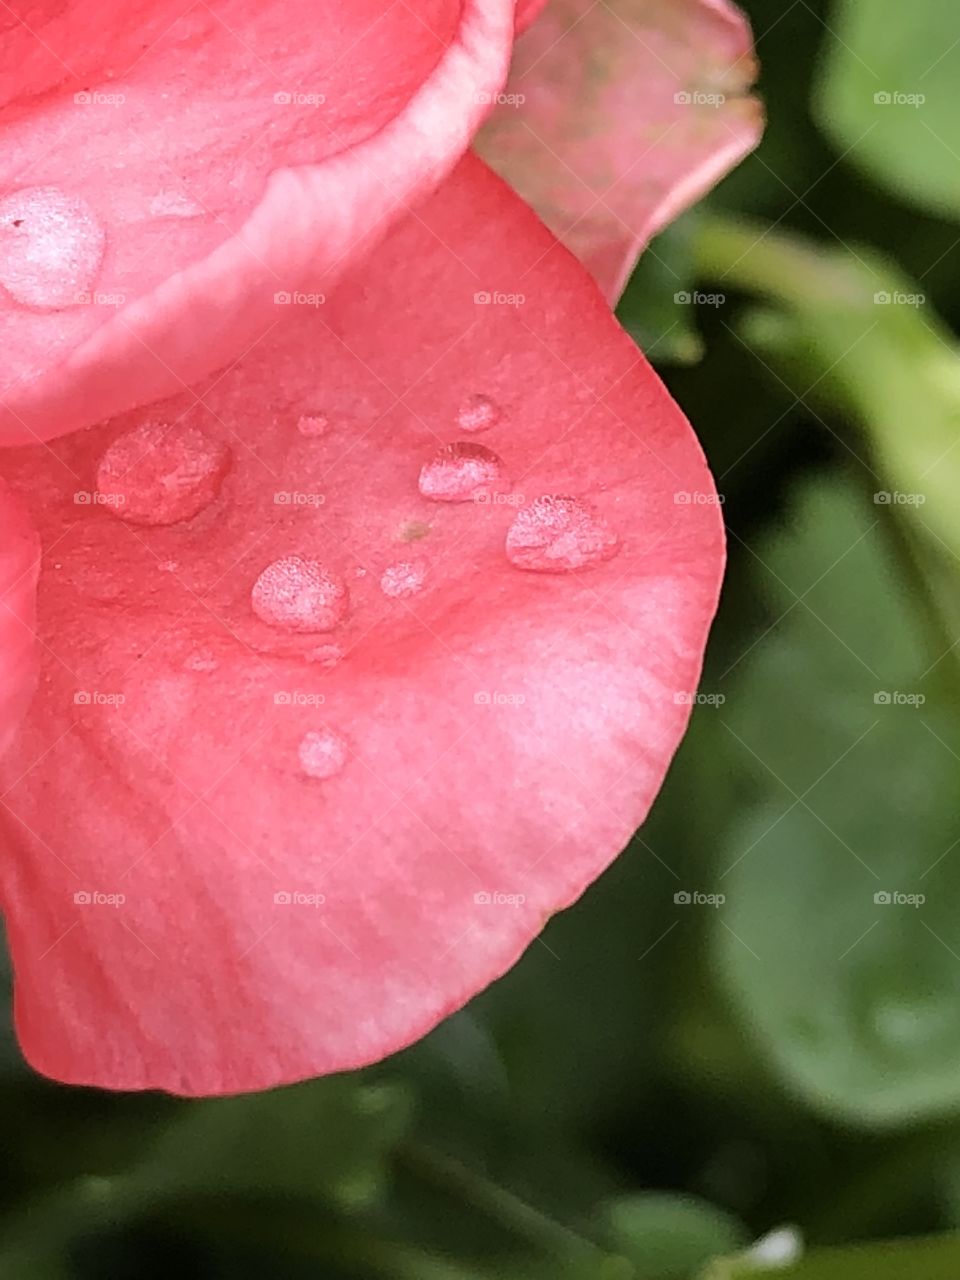 Pink Flower Petal with water droplets, surrounded by green leaves; macro with dof